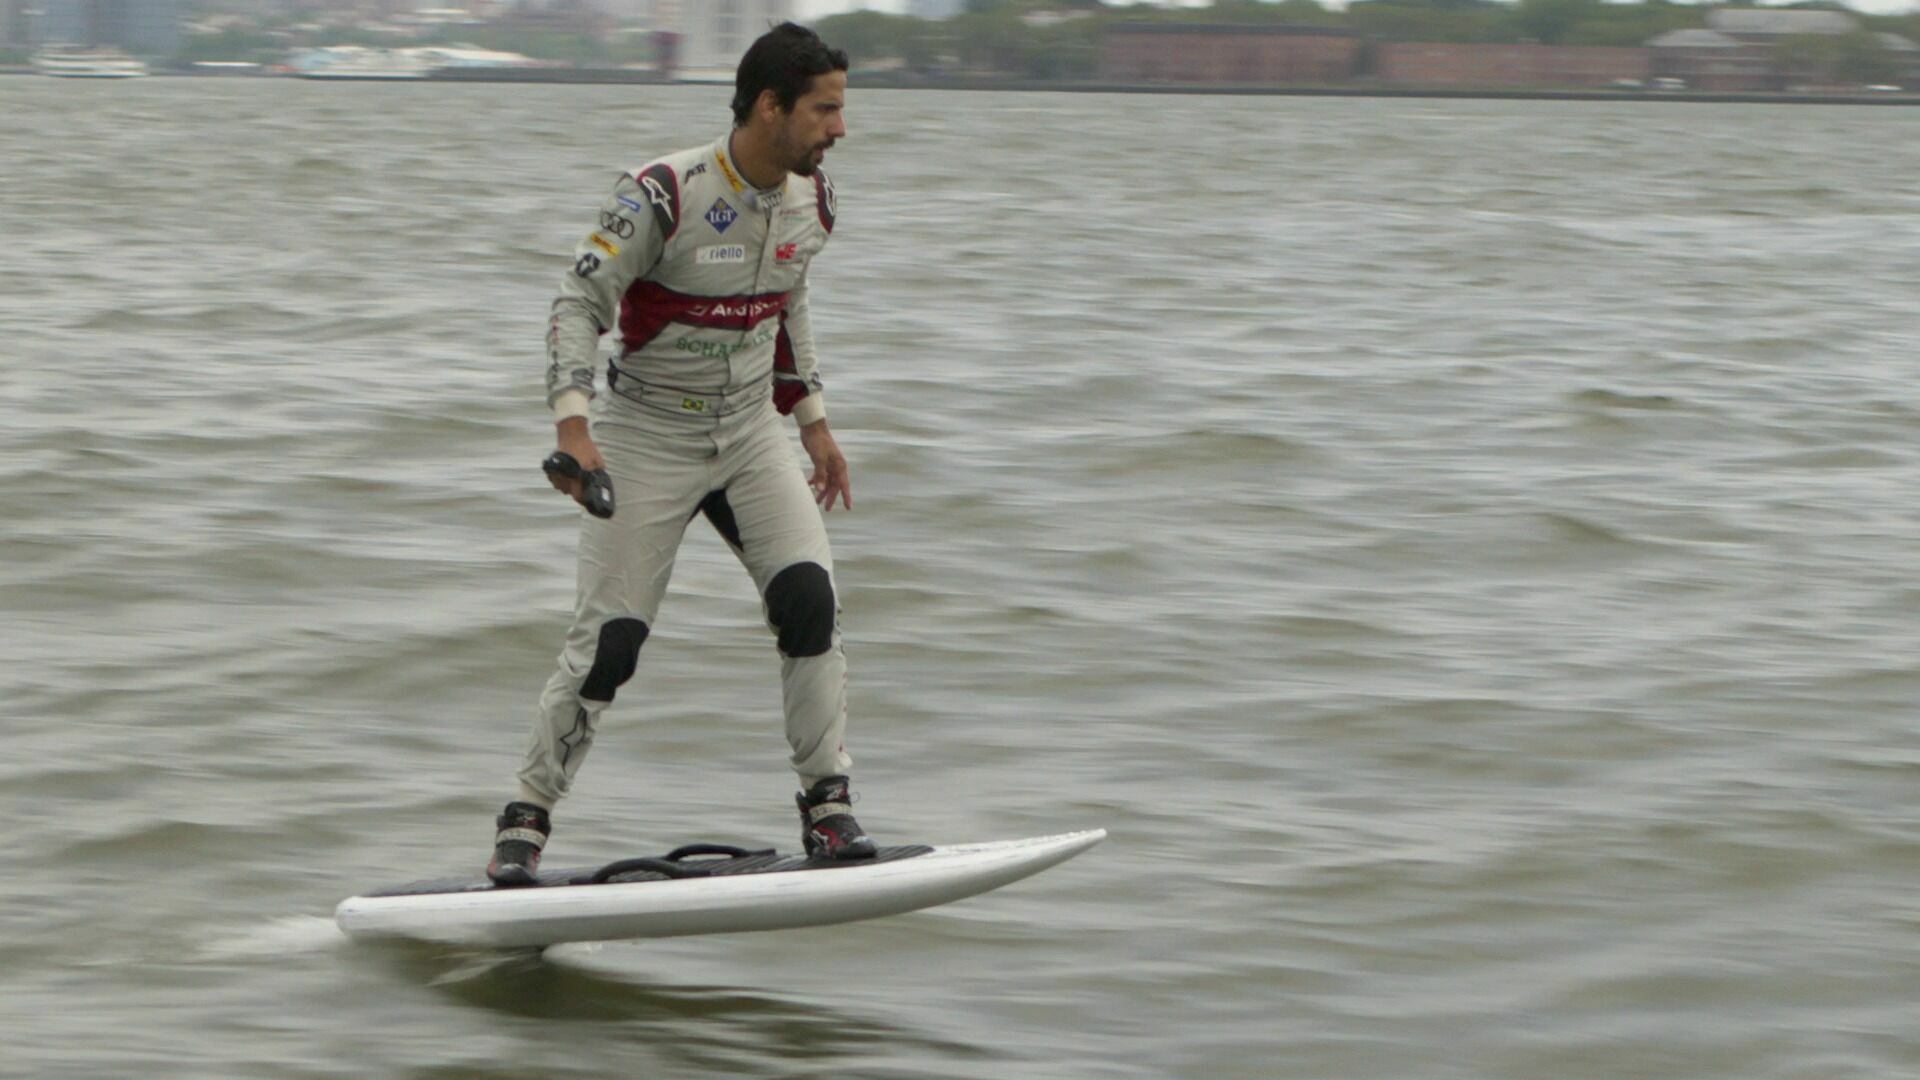 Welcome to New York: Lucas di Grassi’s spectacular ride on the Upper Bay